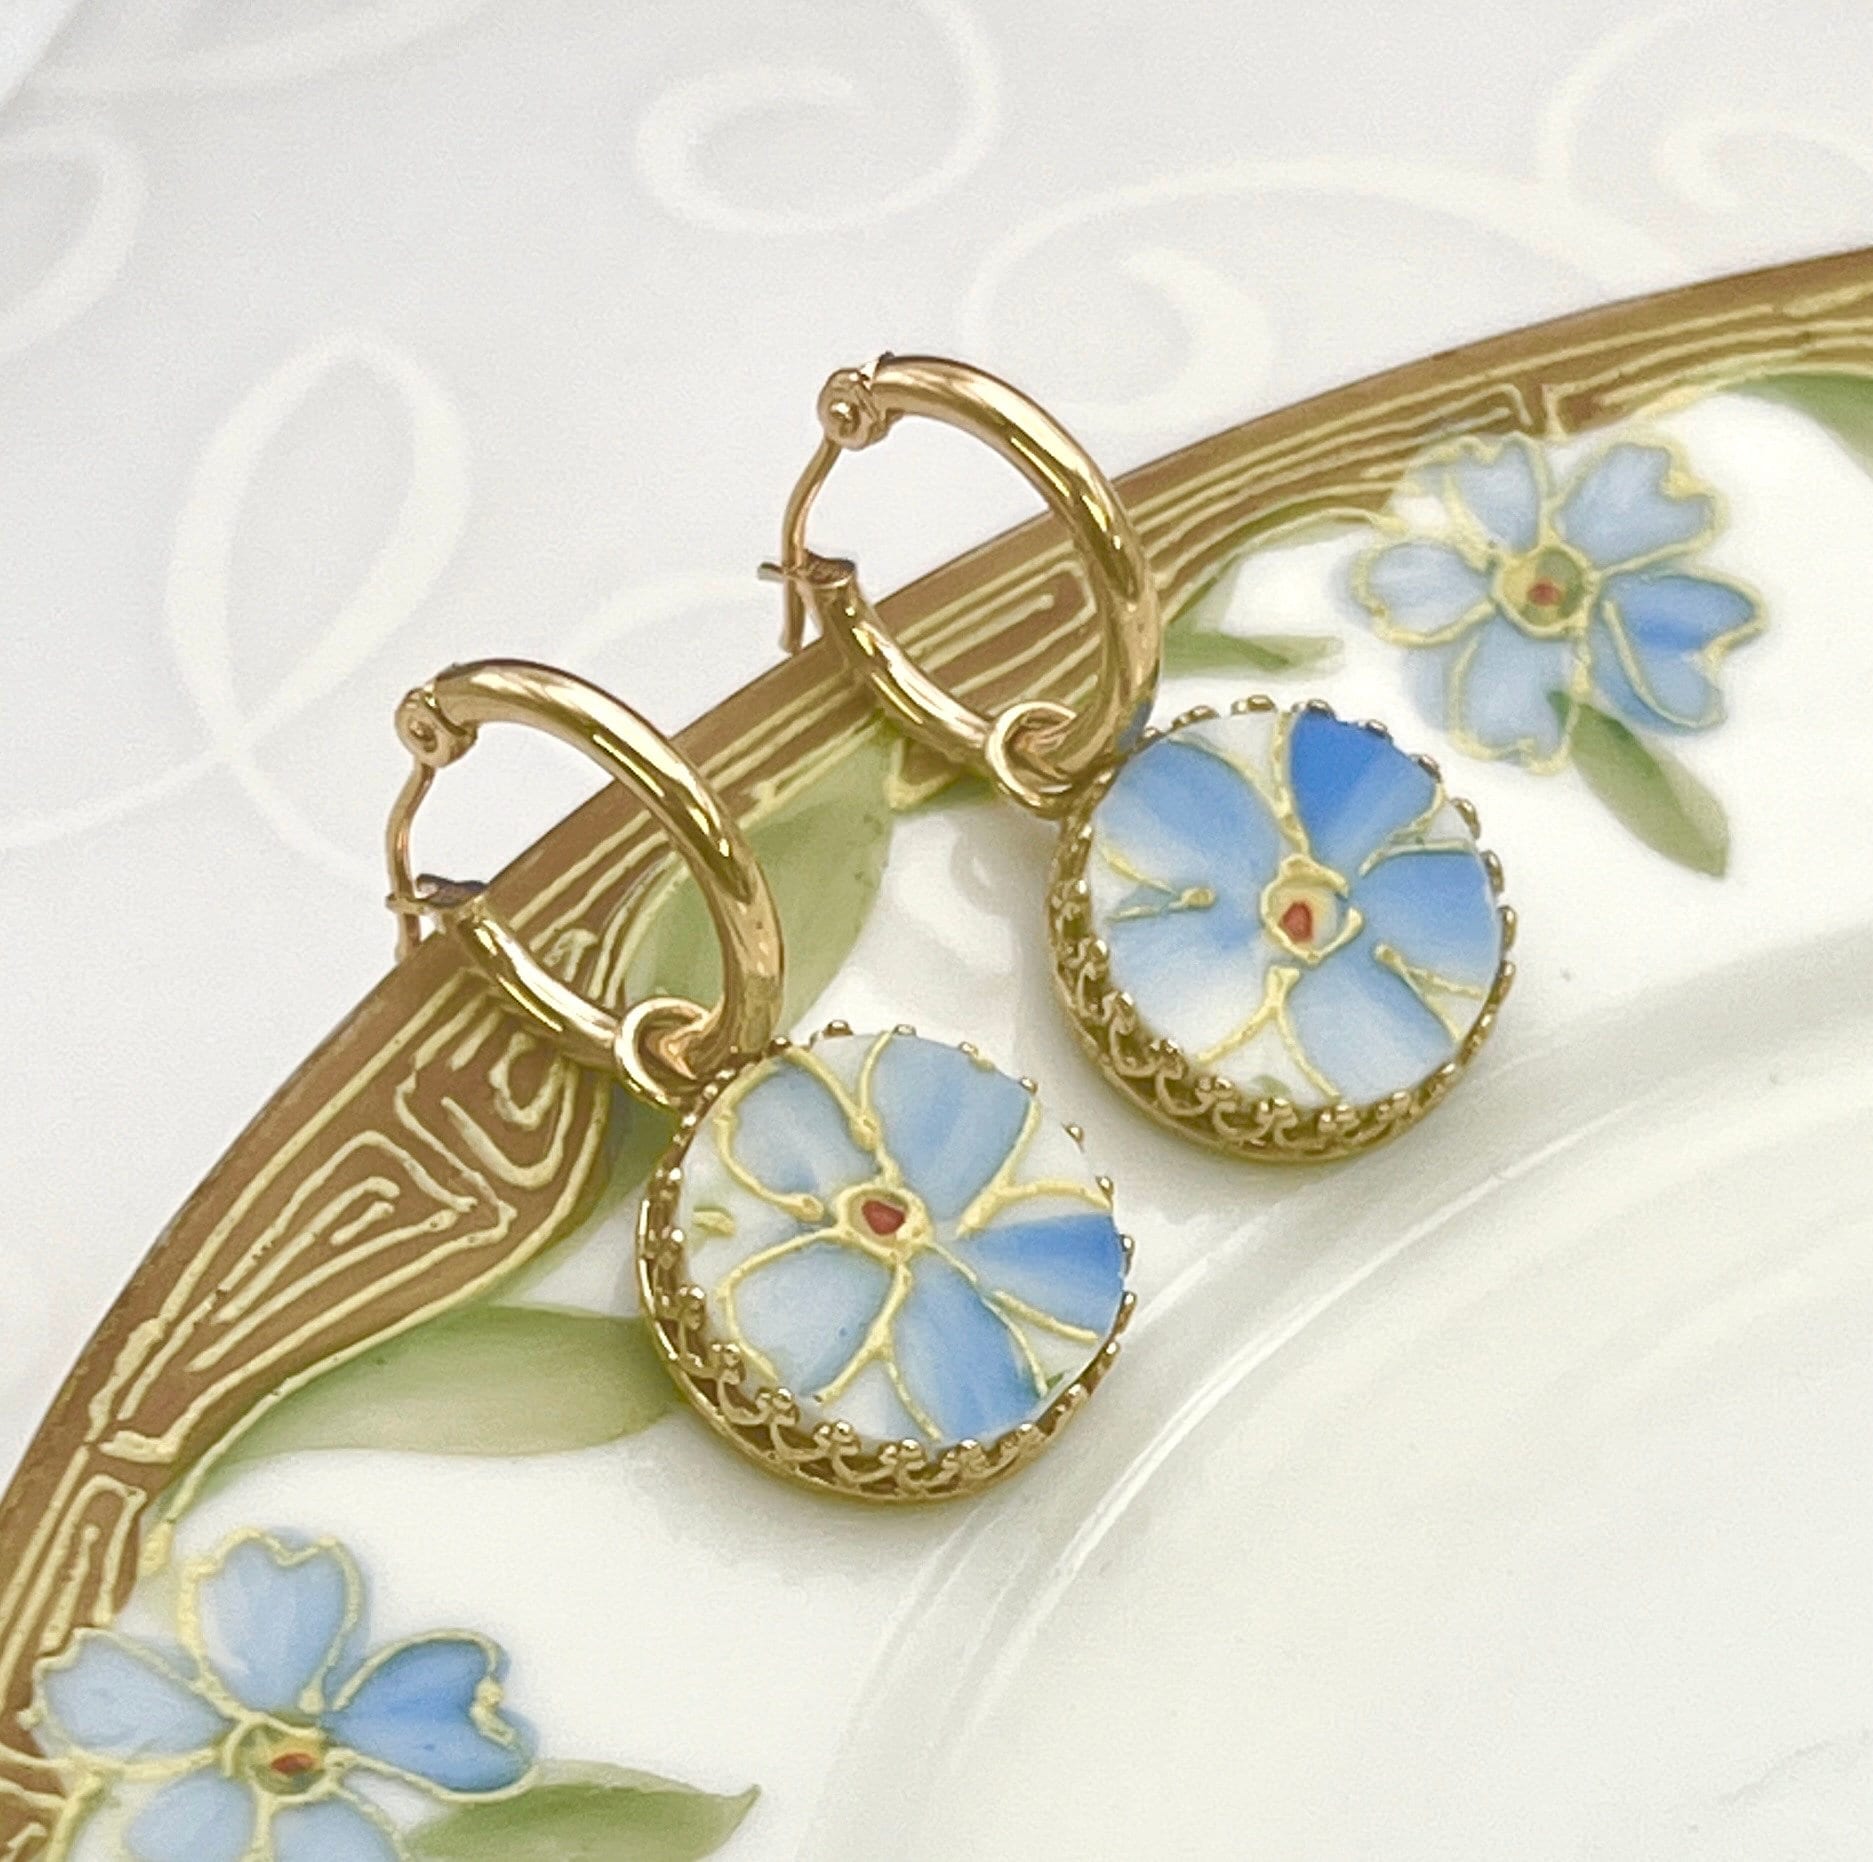 14k Gold Hoop Earrings, Antique Forget Me Not Porcelain, Broken China Jewelry, 18th and 20th Anniversary Gifts, Hand Painted China Jewelry